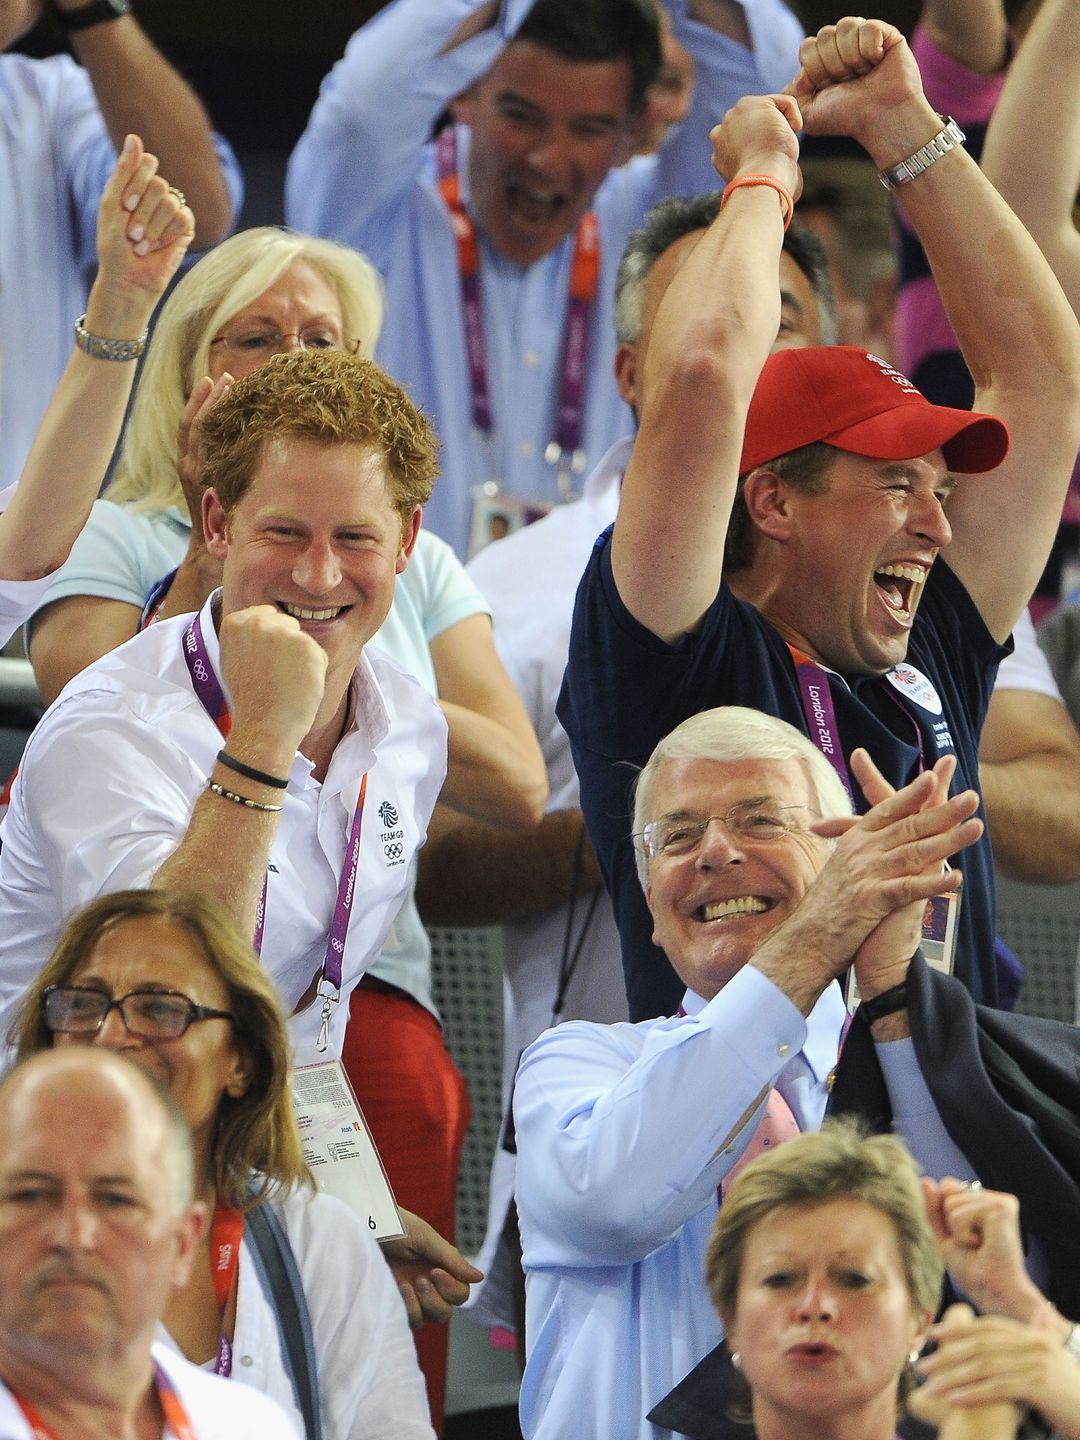 Peter Phillips and Prince Harry cheer during track cycling at London 2012 Olympics